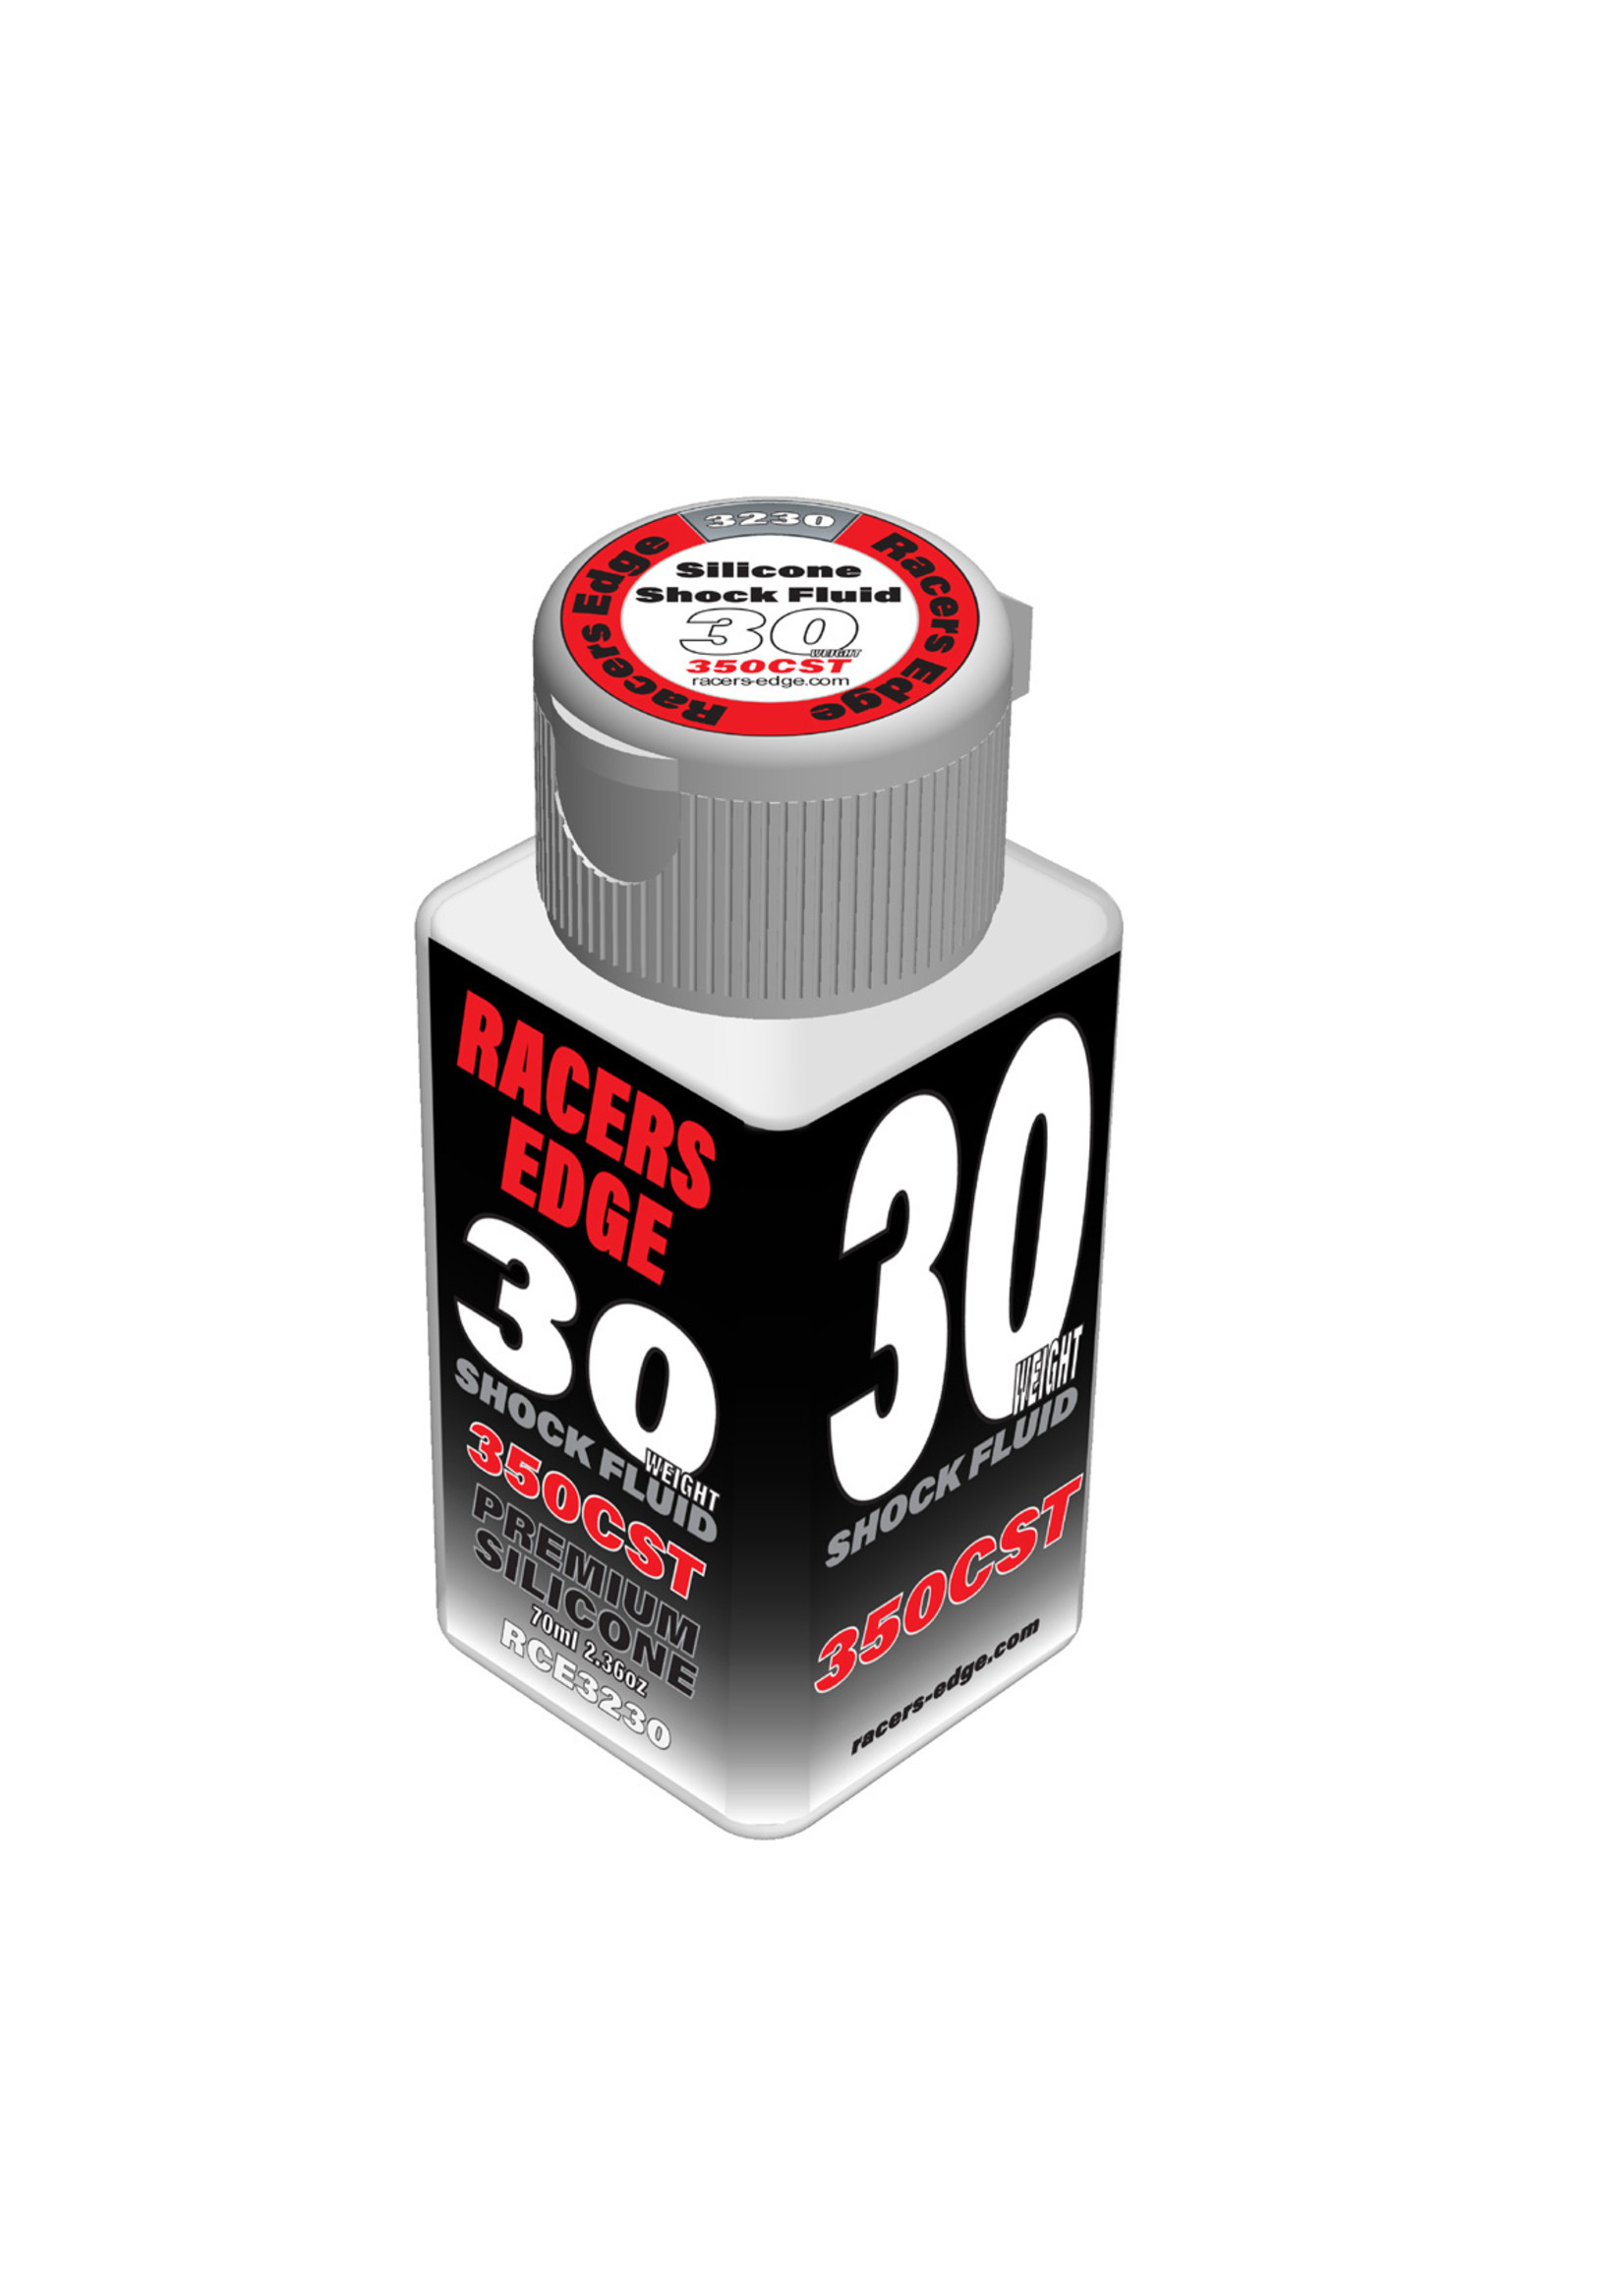 Racers Edge RCE3230 - 30 Weight, 350cSt, 70ml 2.36oz Pure Silicone Shock Oil